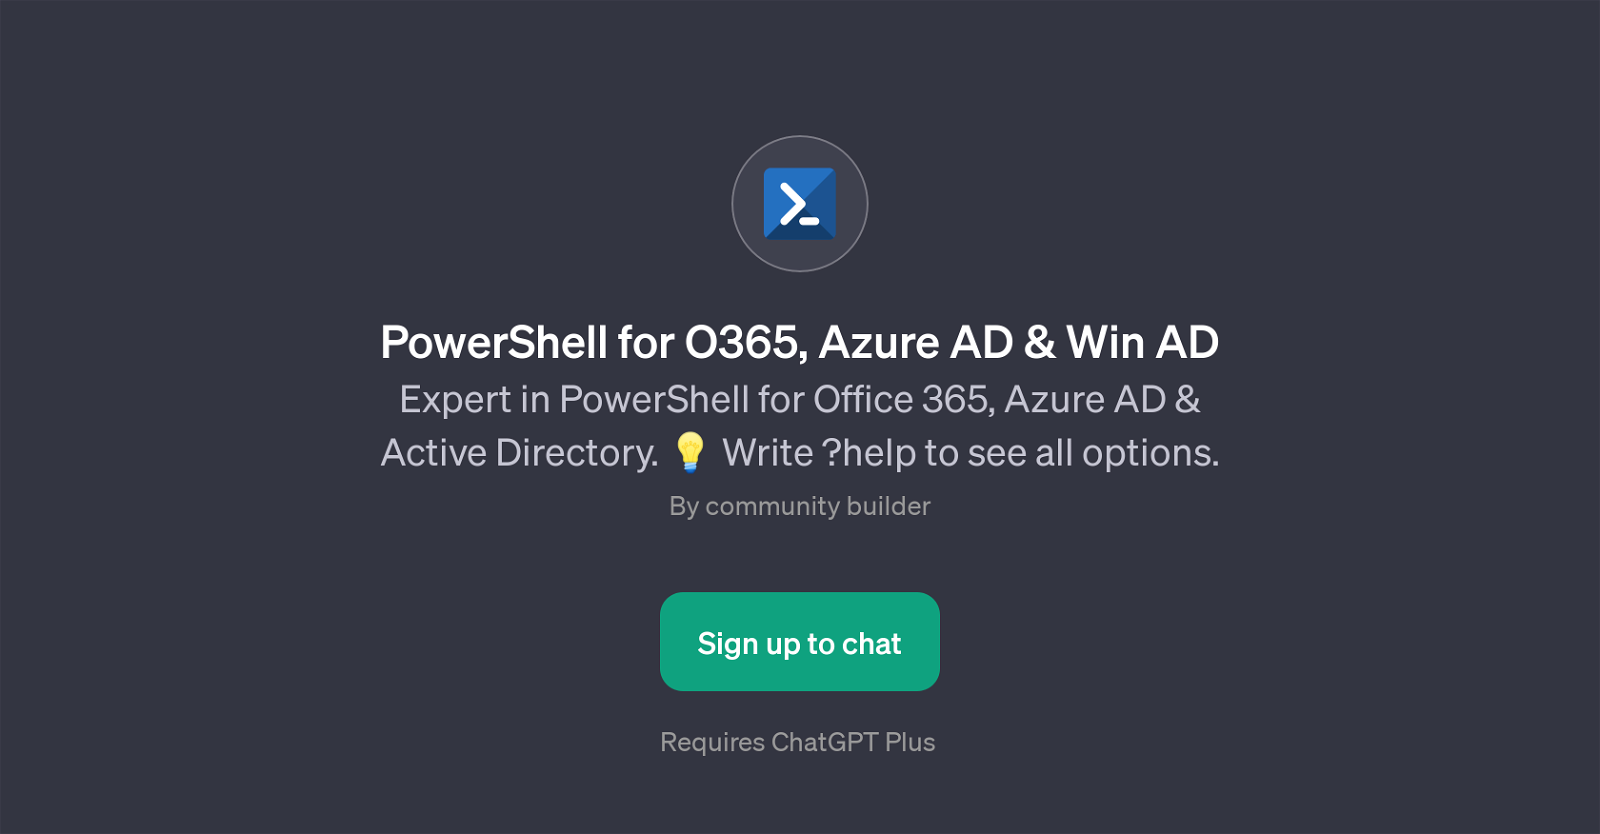 PowerShell for O365, Azure AD & Win AD website